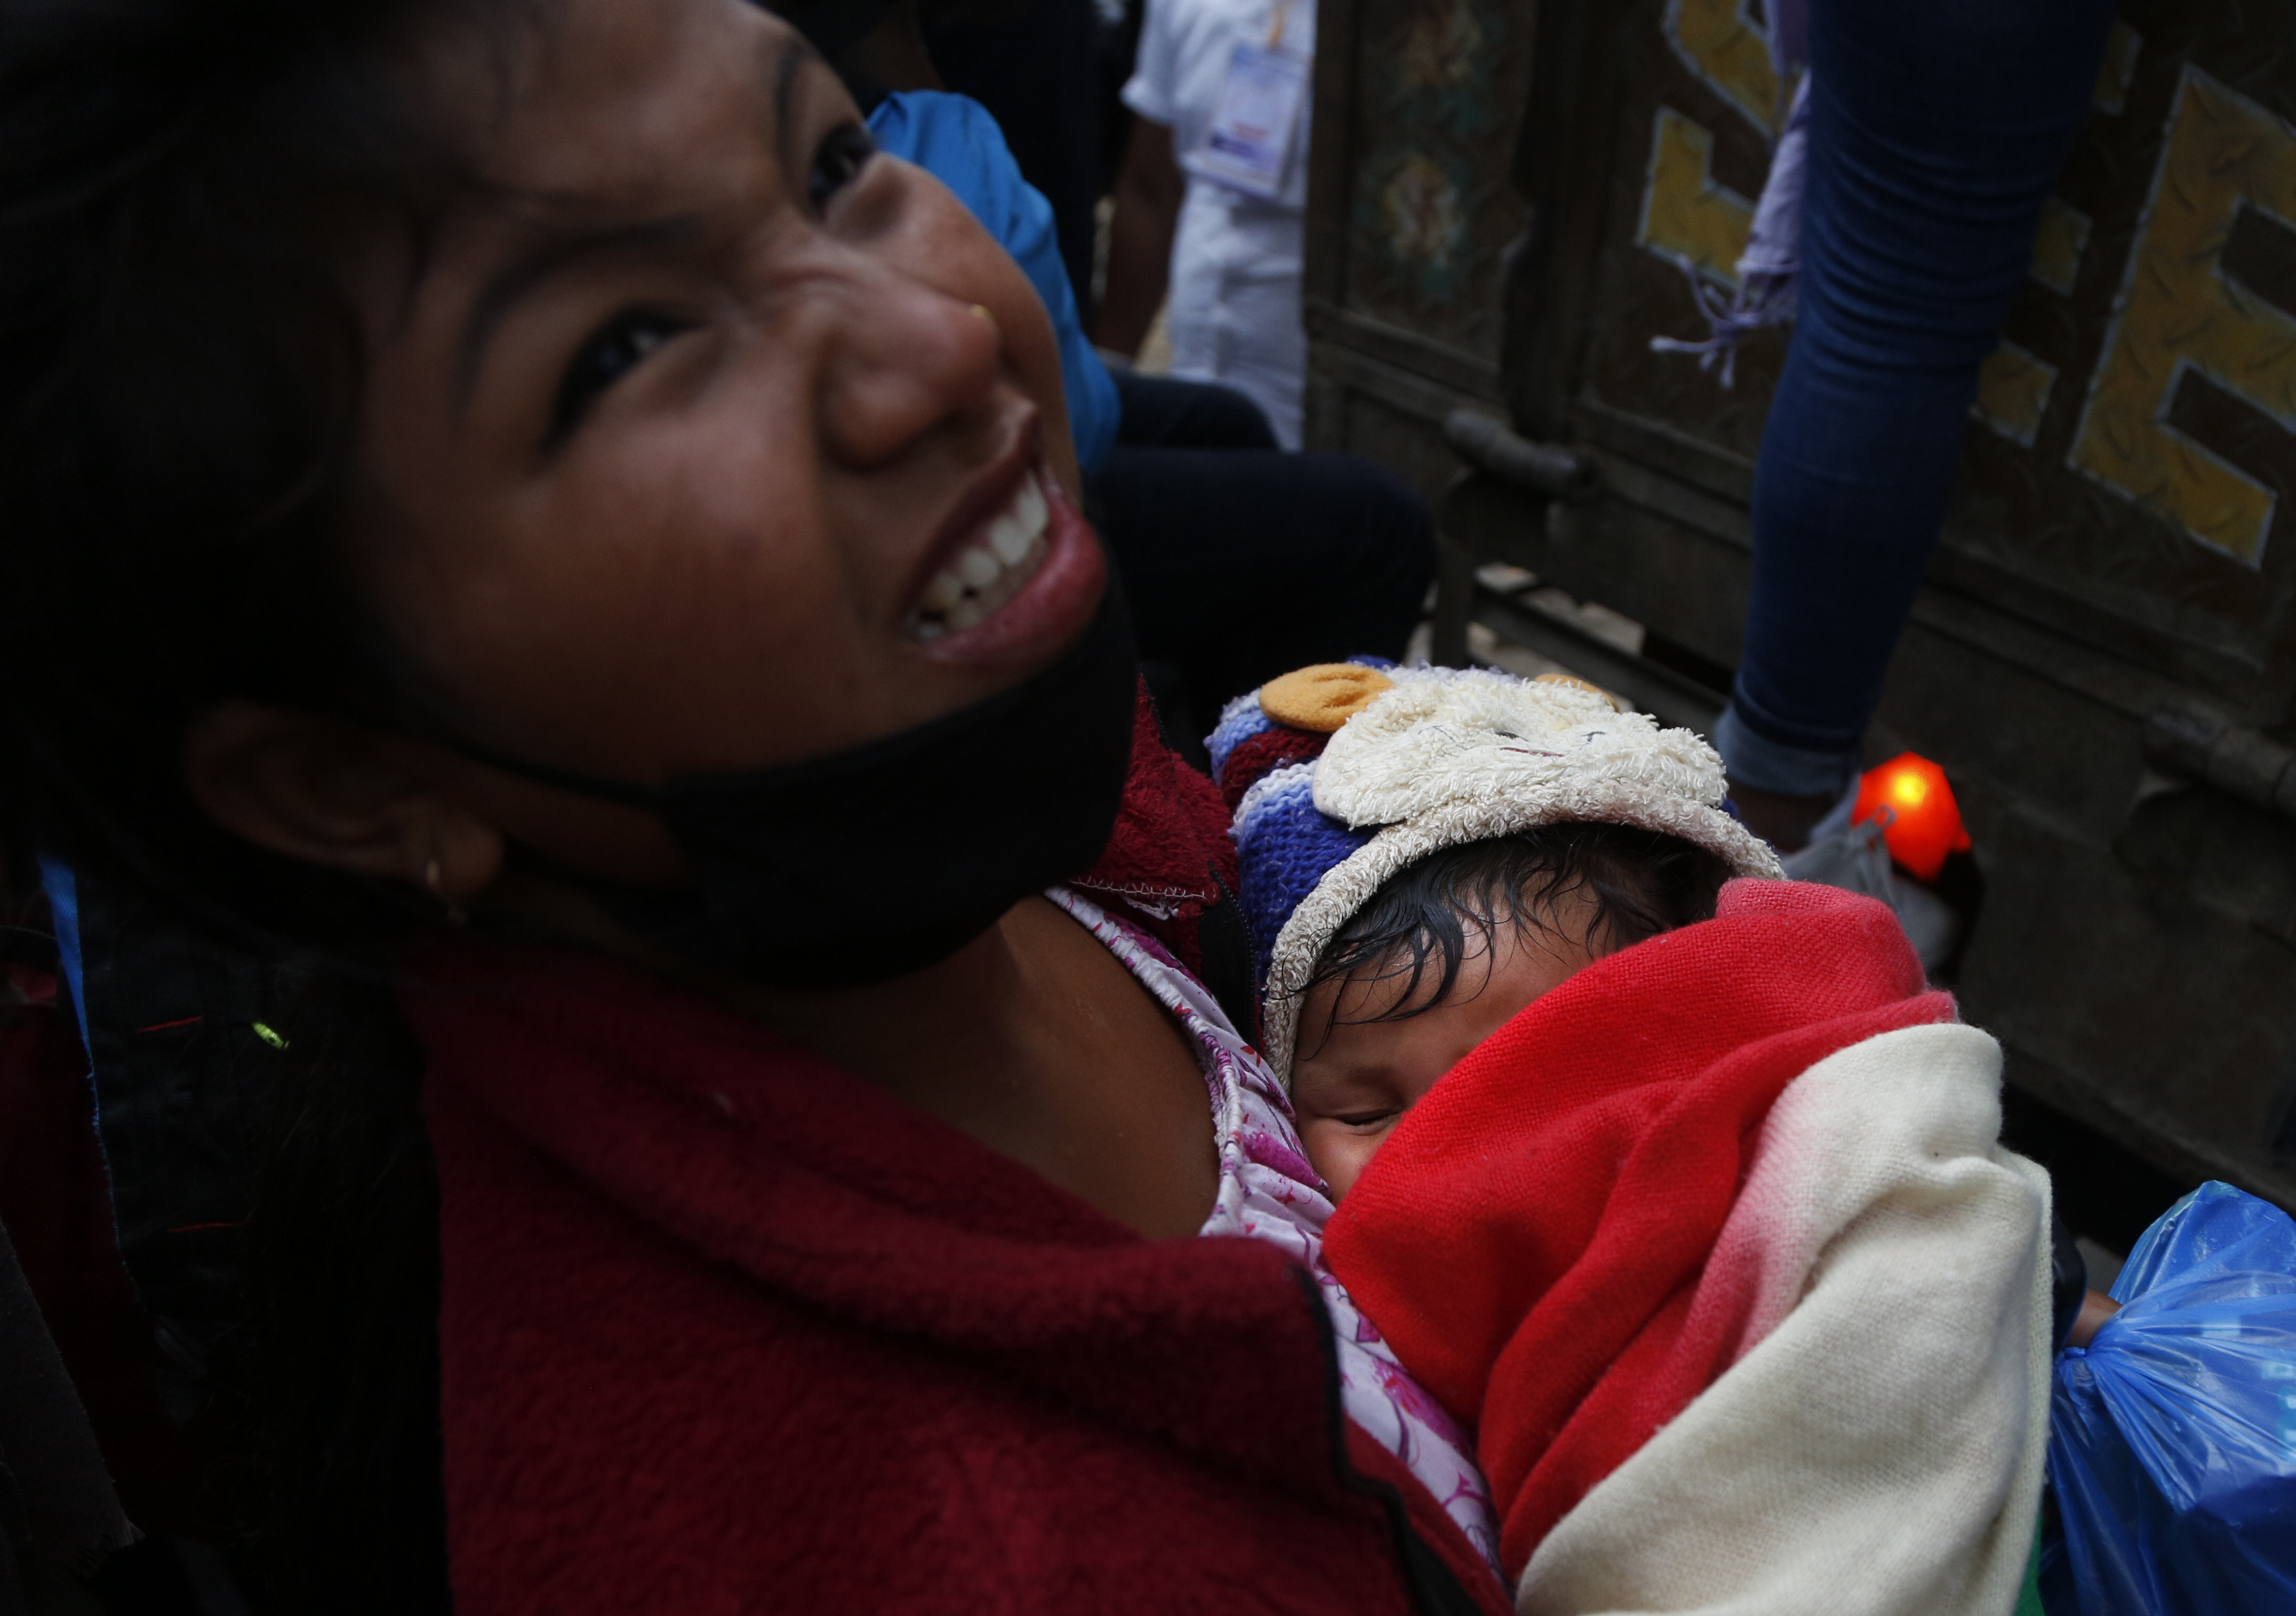 A Nepalese woman carrying an infant struggles to get inside a truck on her way to village, during lockdown to prevent the spread of the new coronavirus in Bhaktapur, Nepal, Monday, April 20, 2020. The supreme court passed an interim order on Friday instructing the Nepalese government to ensure free transportation for stranded daily wage workers and others making the long journey back to their respective villages on foot. (AP Photo/Niranjan Shrestha)